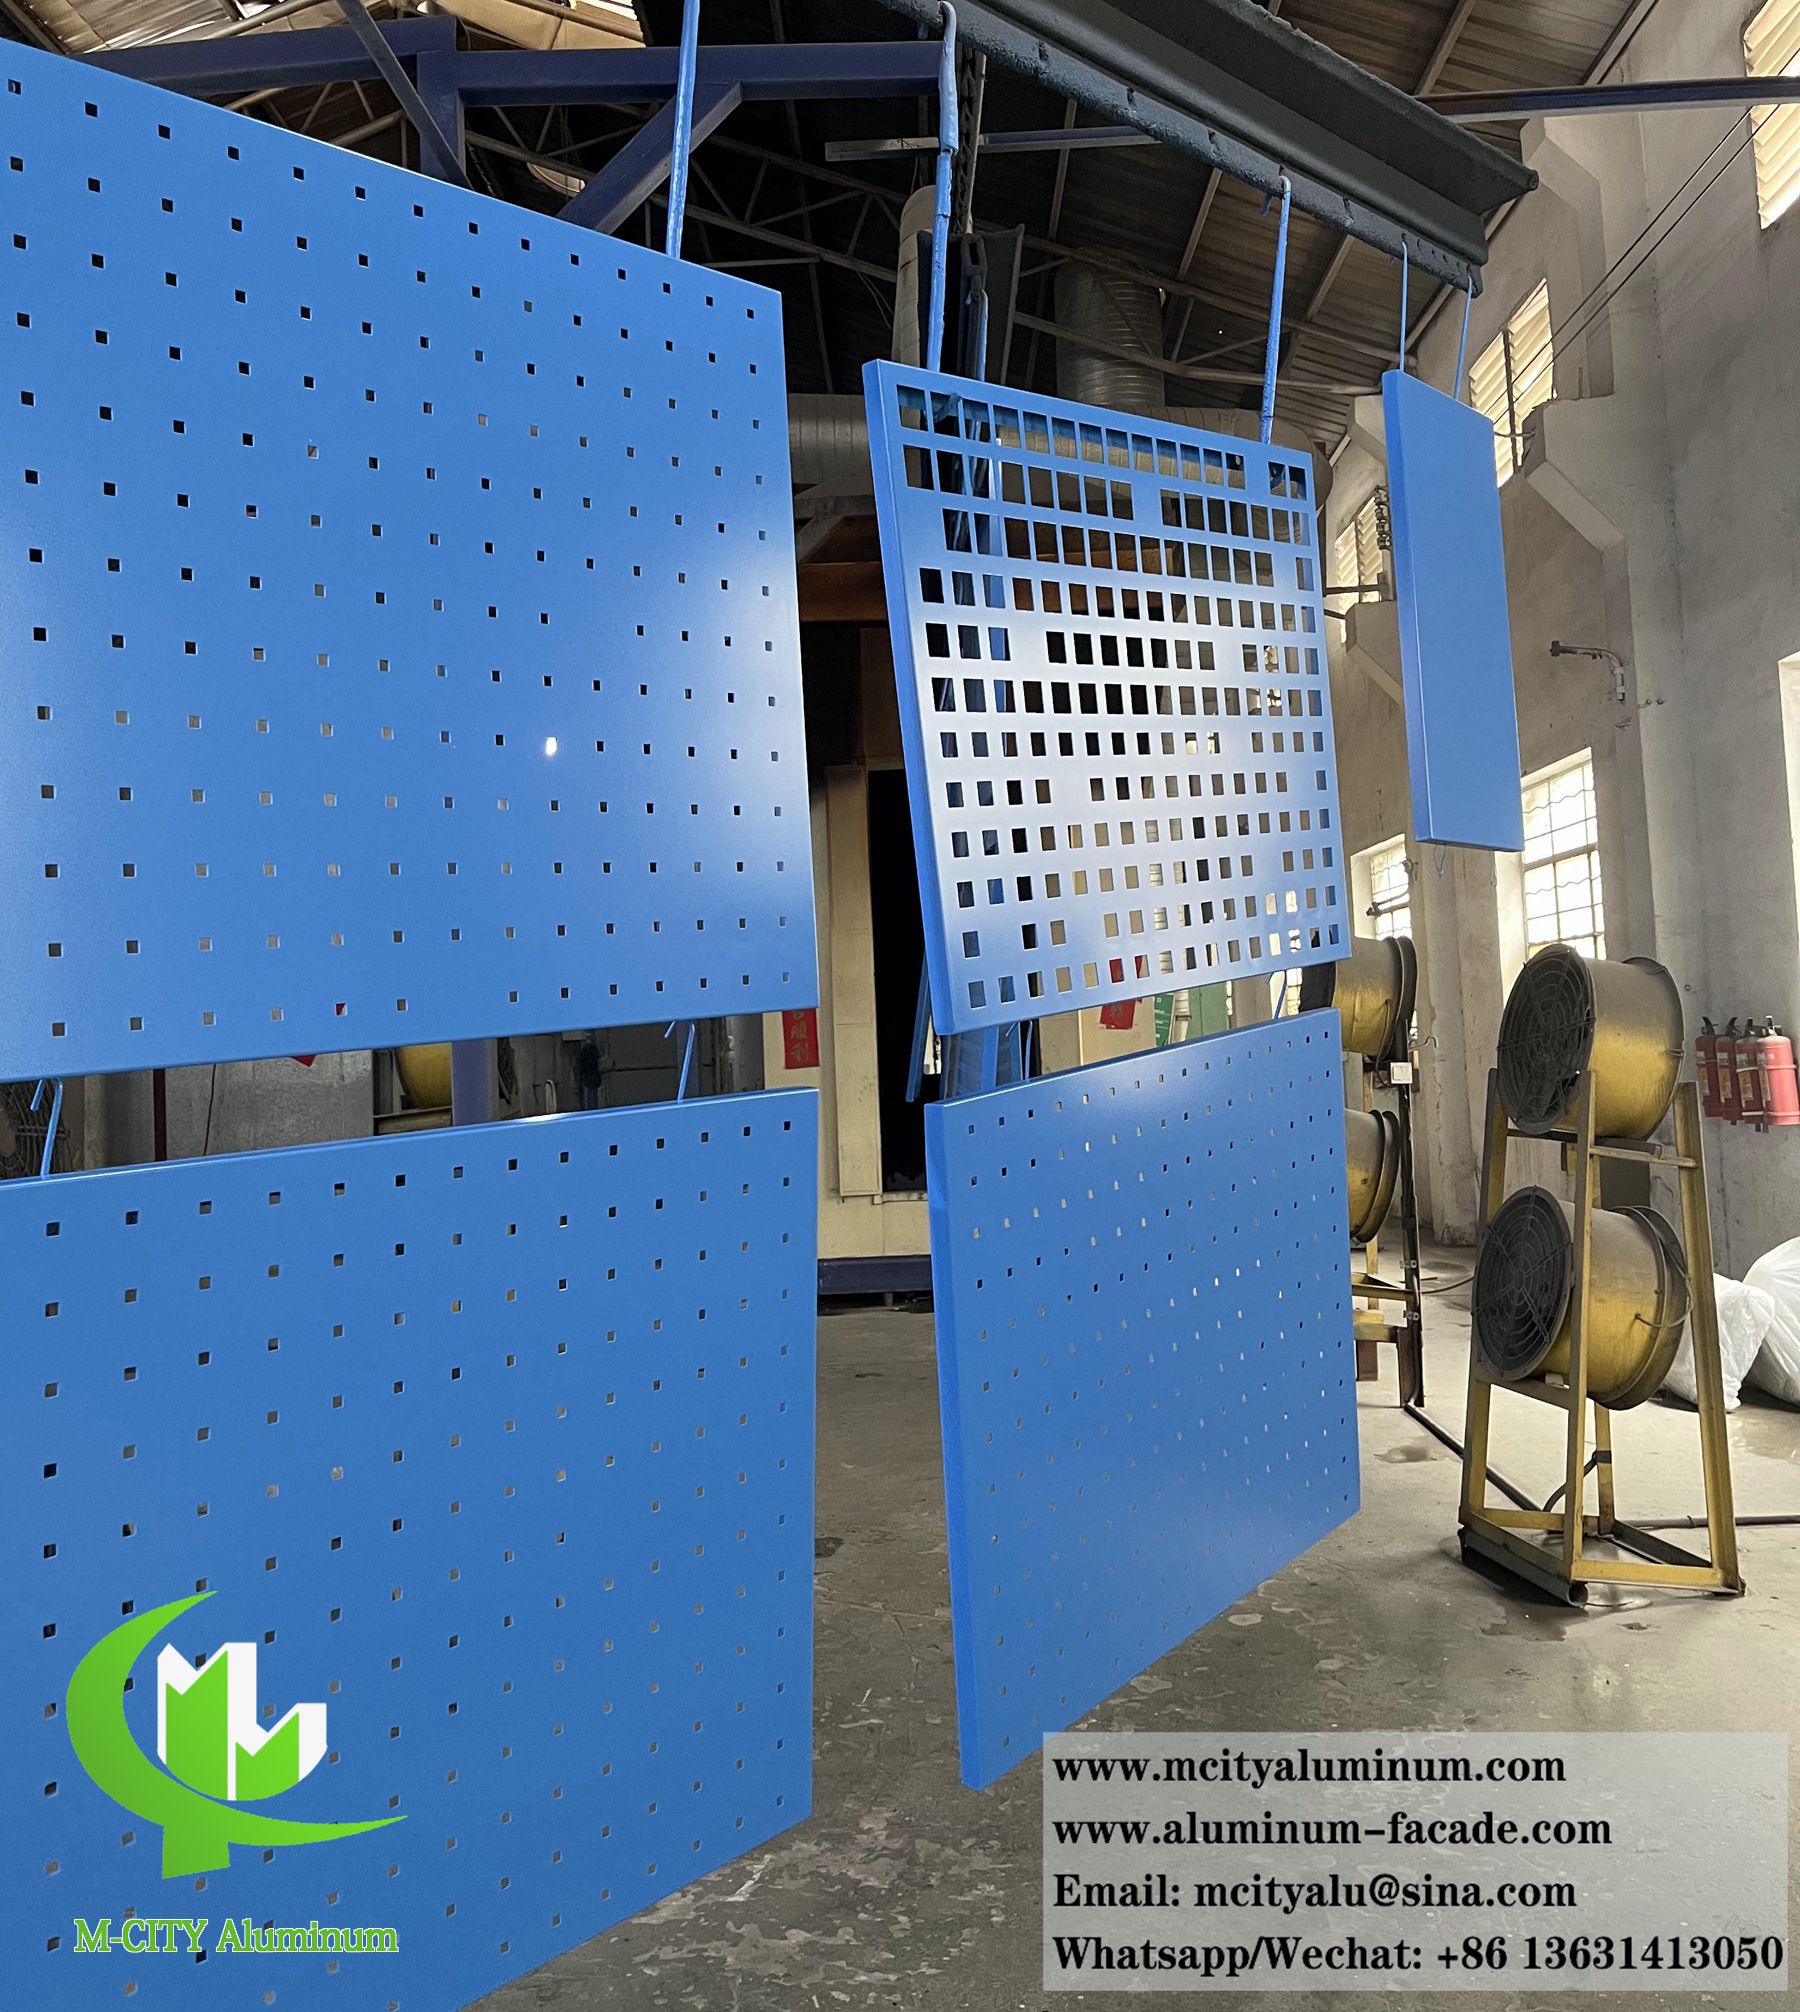 Outdoor solid aluminum cladding metal facades panels with perforating pattern